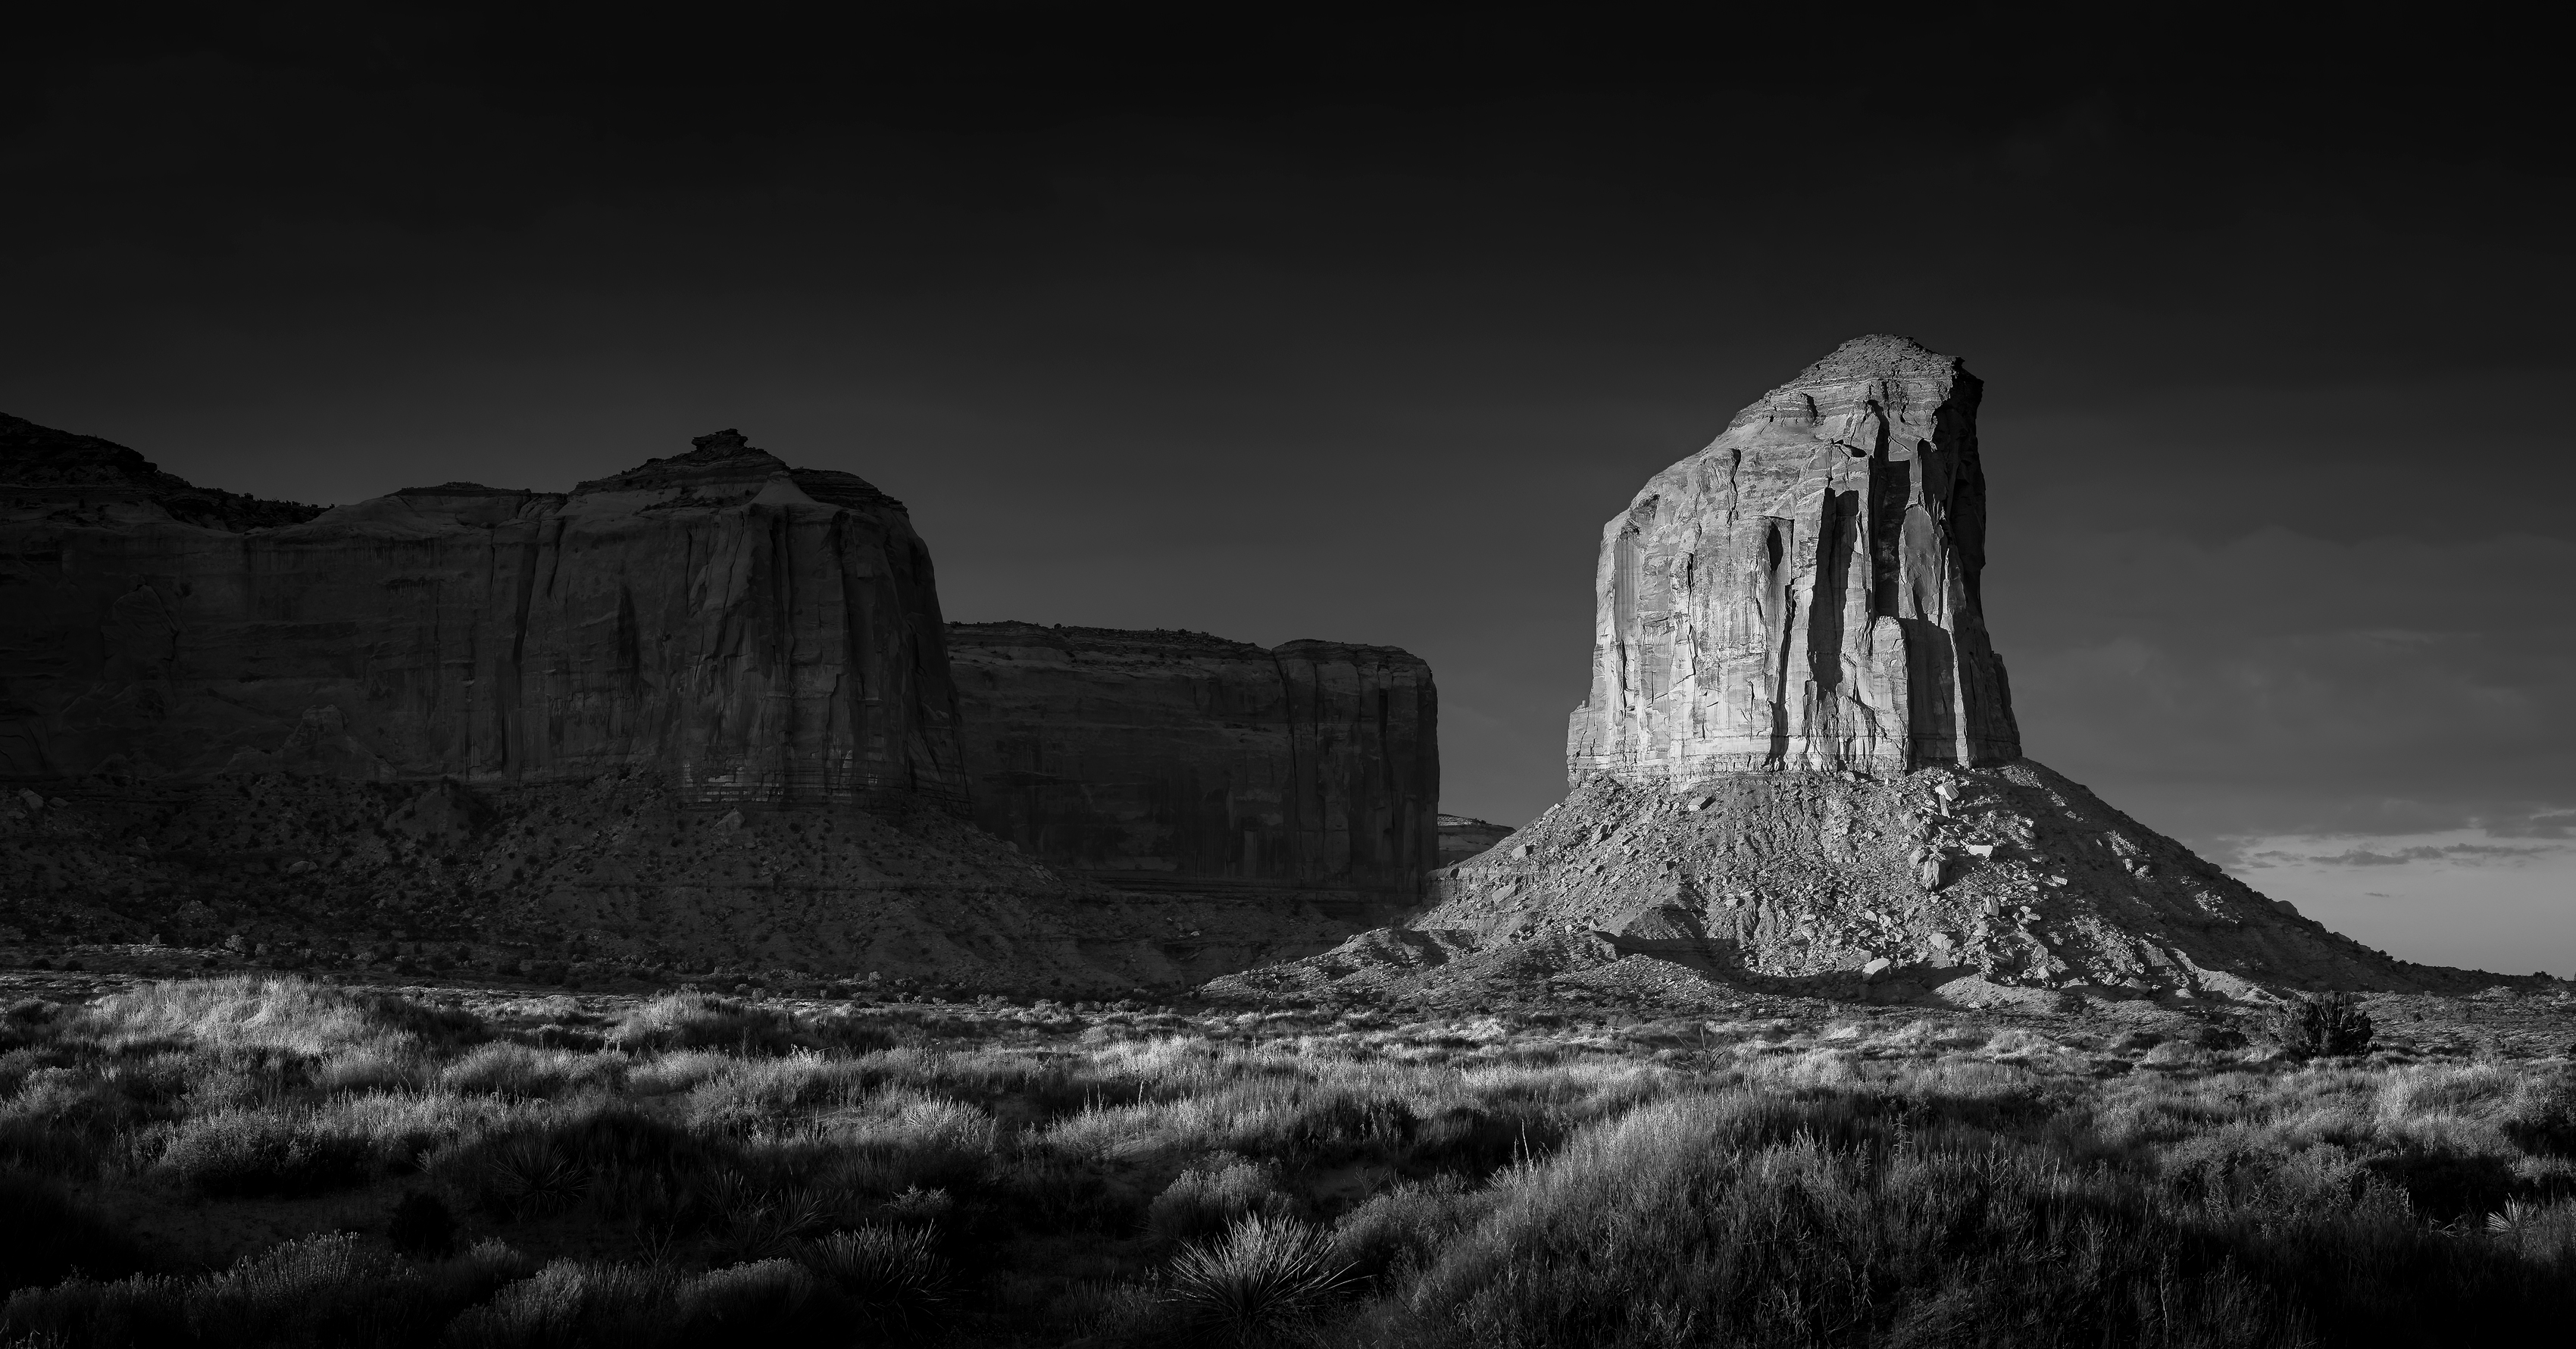 Grey Whiskers Butte lit by morning sun photographed in black and white by Jason Robert O'Kennedy. | Photo Title: Grey Whiskers Butte | 
        Photo by Jason Robert O'Kennedy ©2019